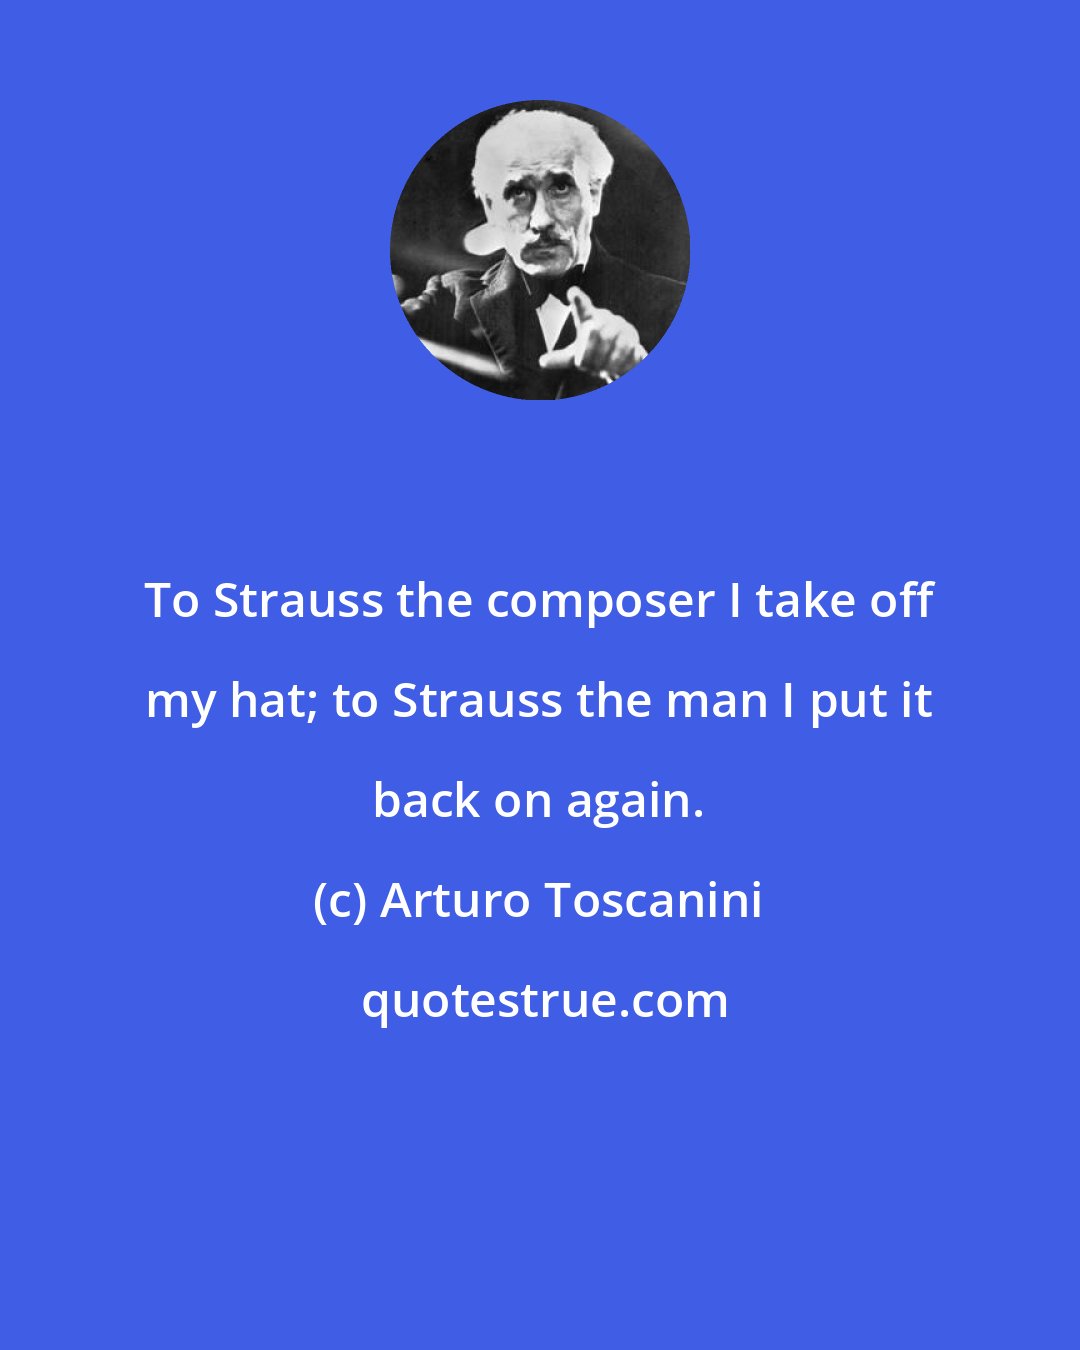 Arturo Toscanini: To Strauss the composer I take off my hat; to Strauss the man I put it back on again.